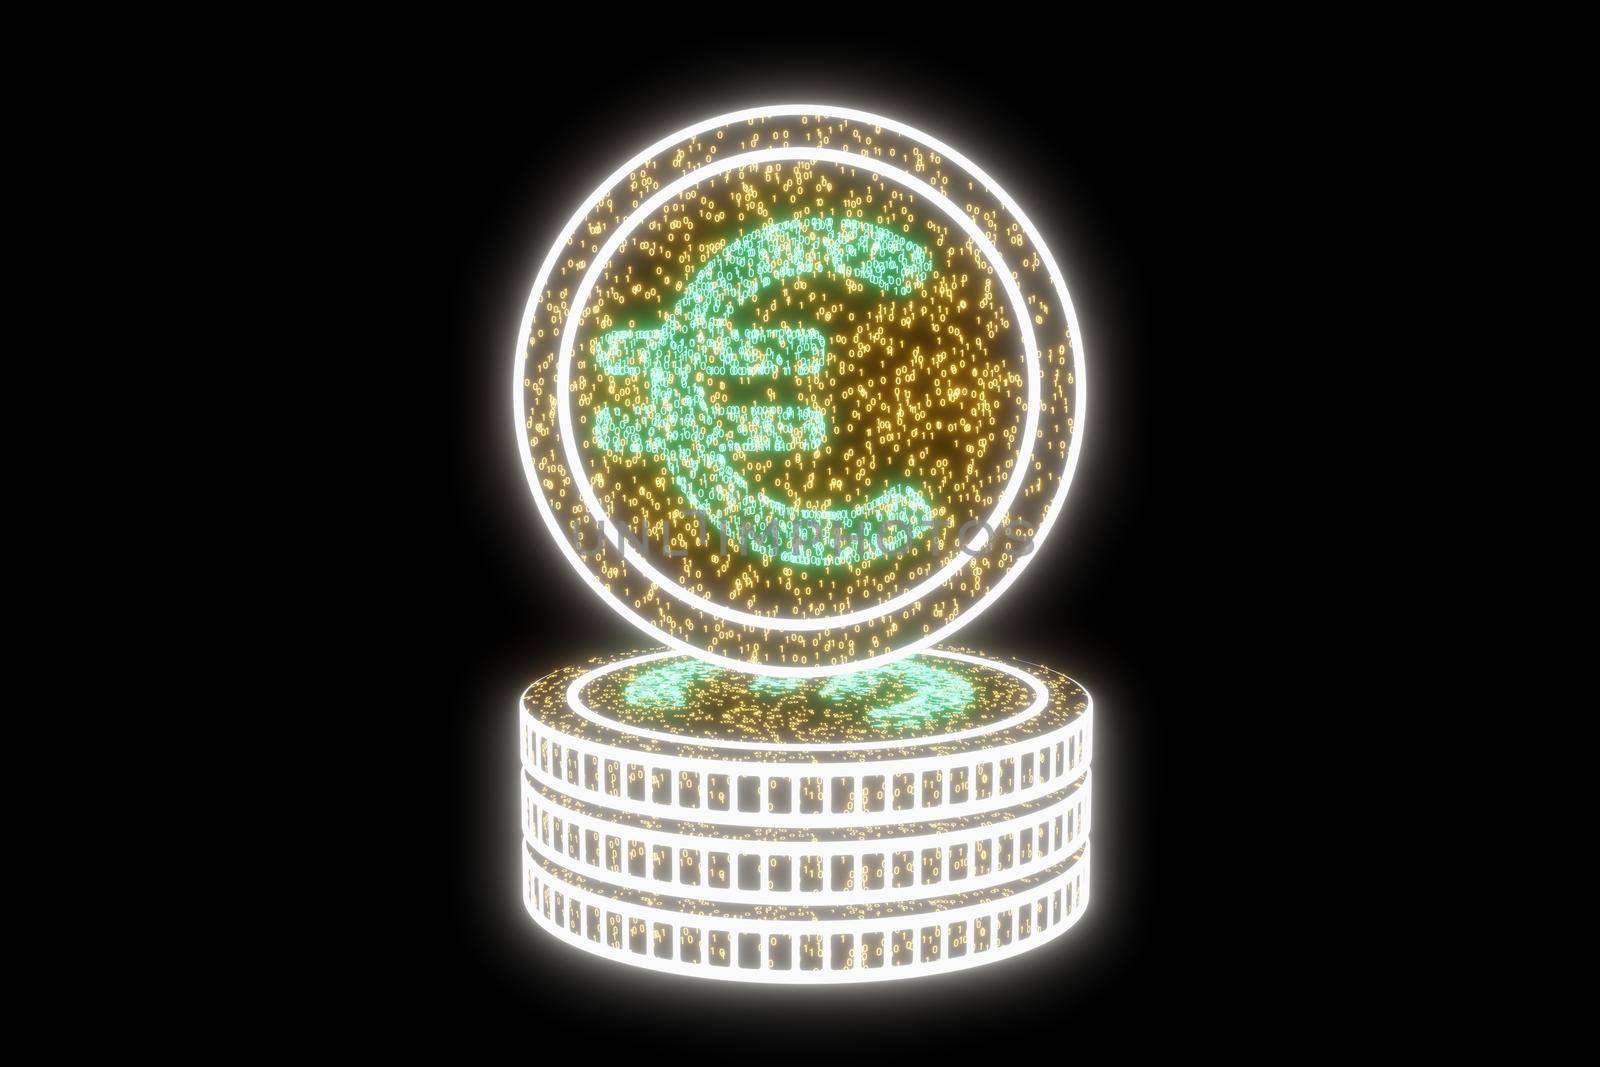 Digital currency euro. Euro finance stock trading exchange concept. Businessman touched eur currency icon on virtual financial screen. World money trade market technology.